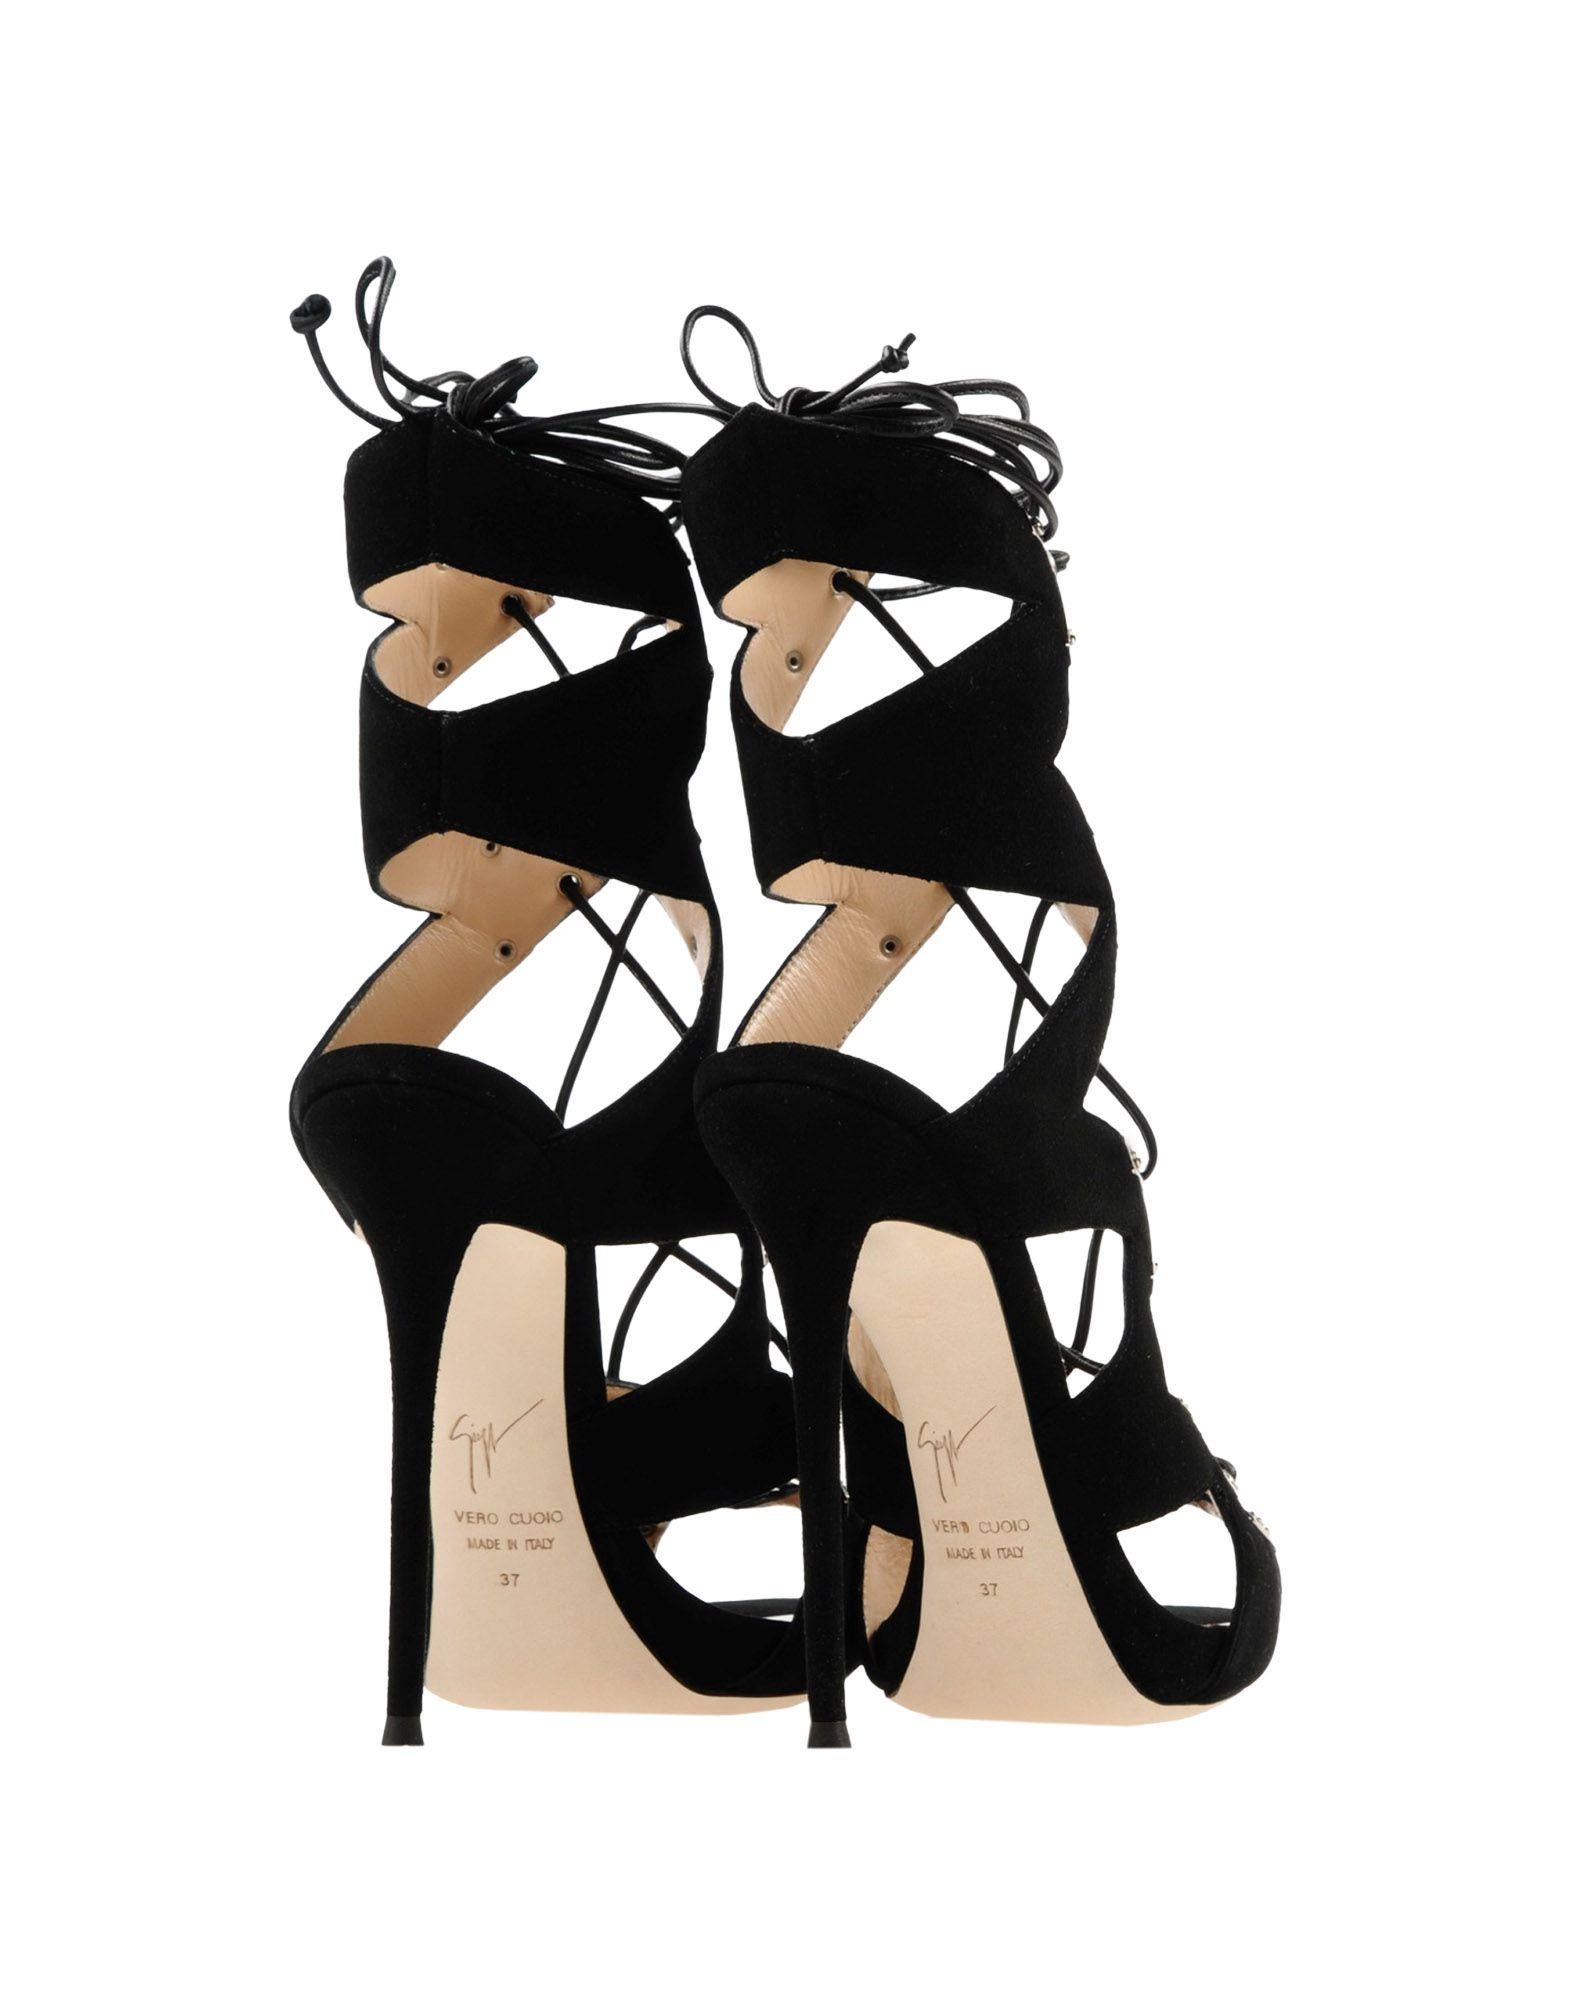 Giuseppe Zanotti NEW Black Suede Metal Cut Out Tie Up Evening Sandals Heels 1